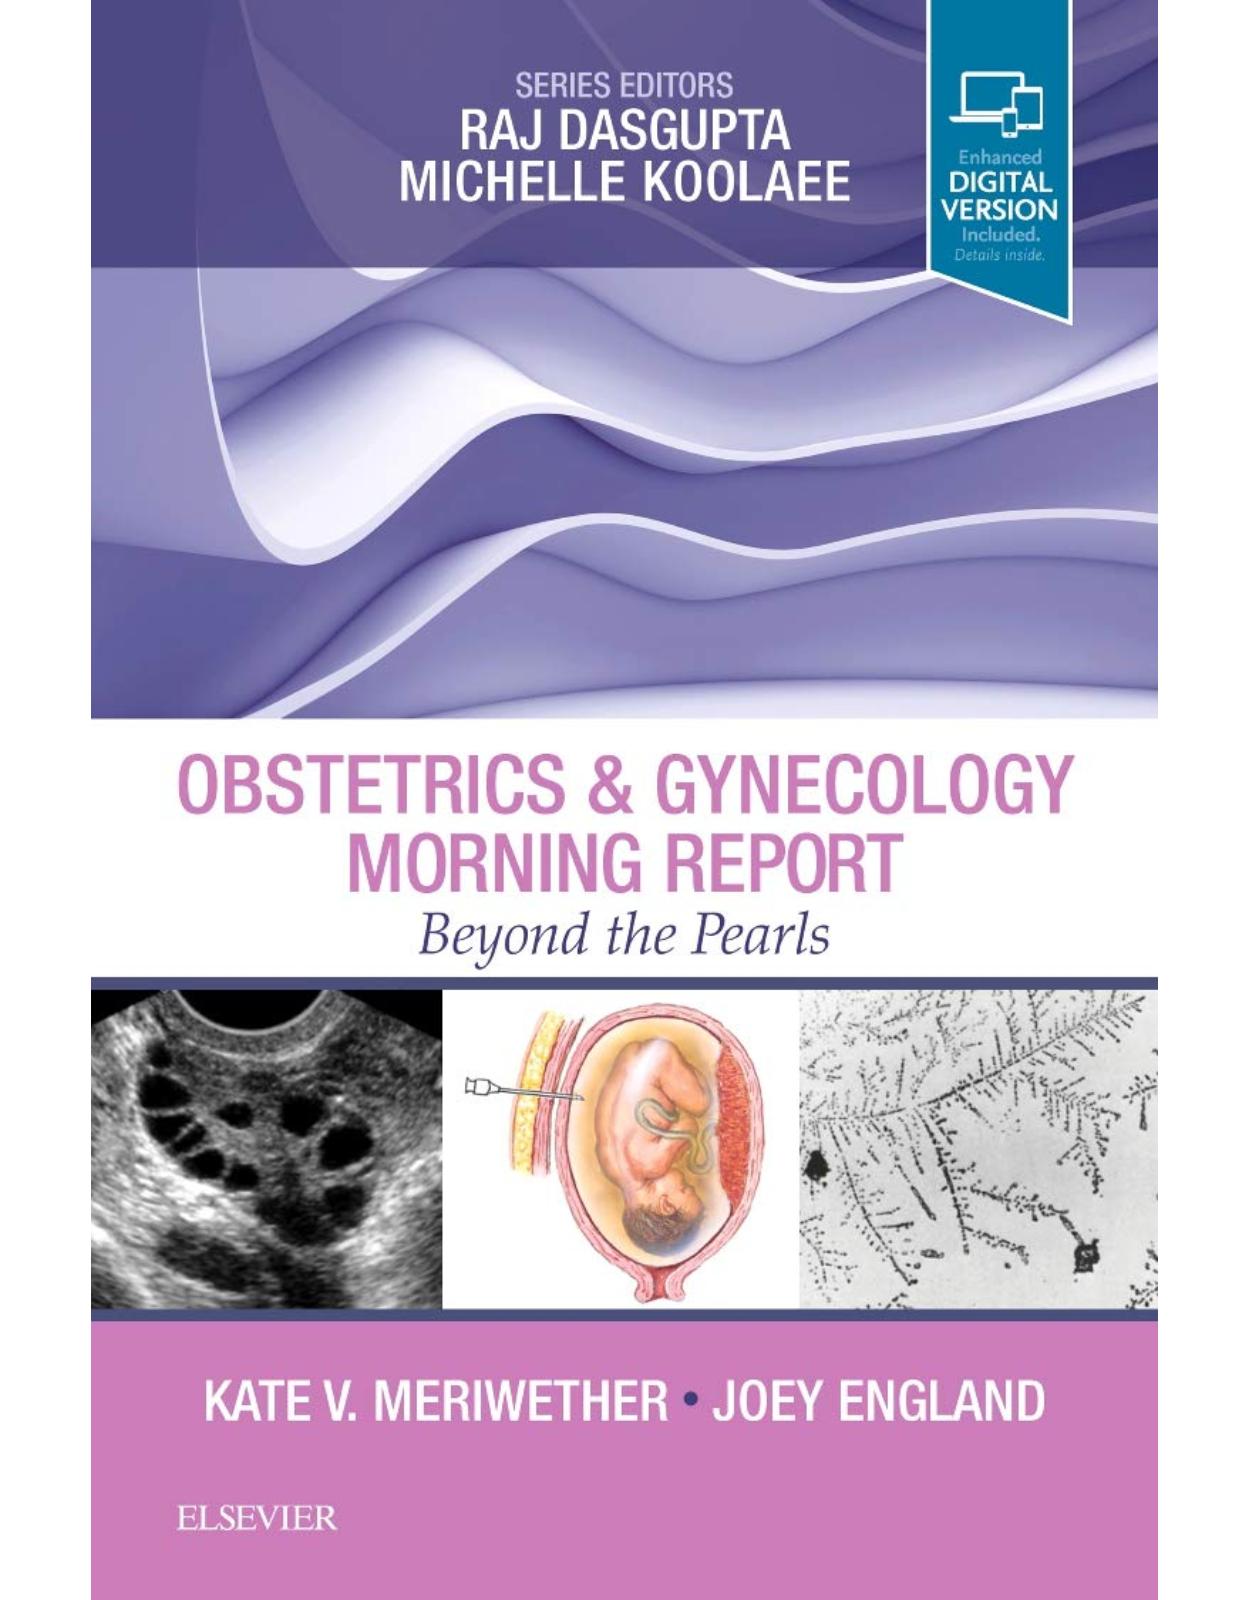 Obstetrics & Gynecology Morning Report: Beyond the Pearls, 1e